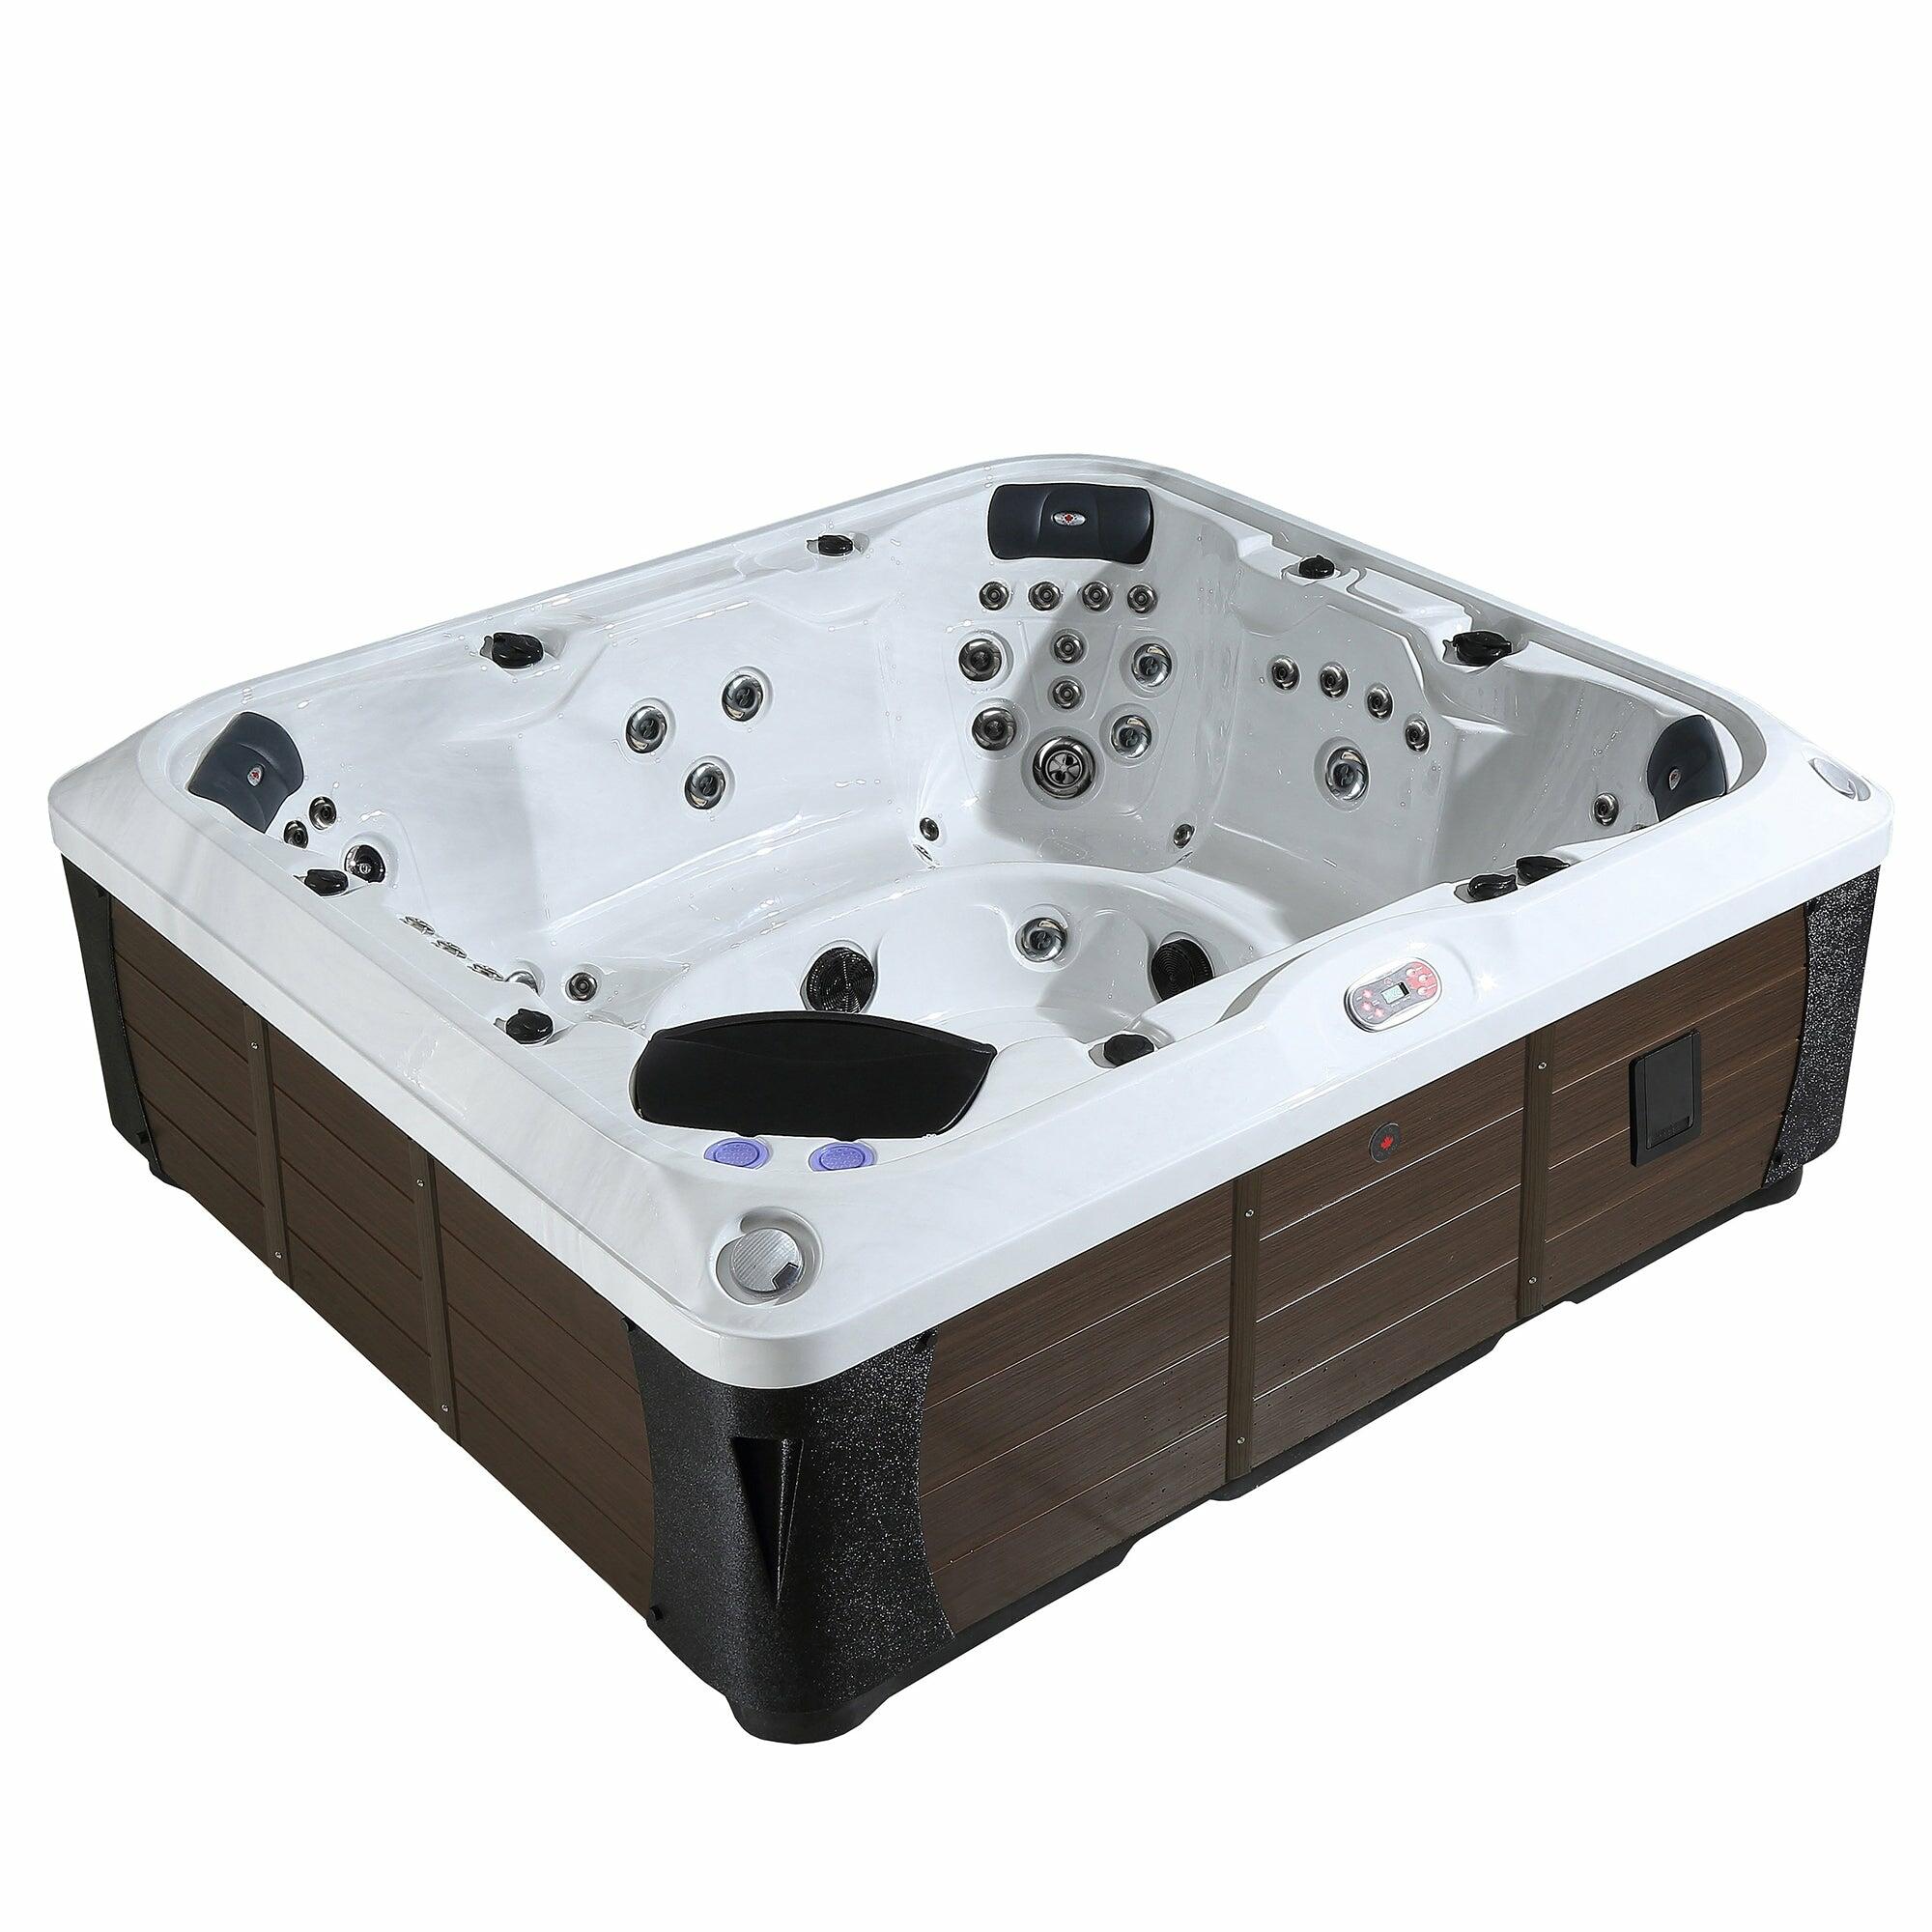 An image of Canadian Spa Kingston 55 Jet 7 Person Hot Tub